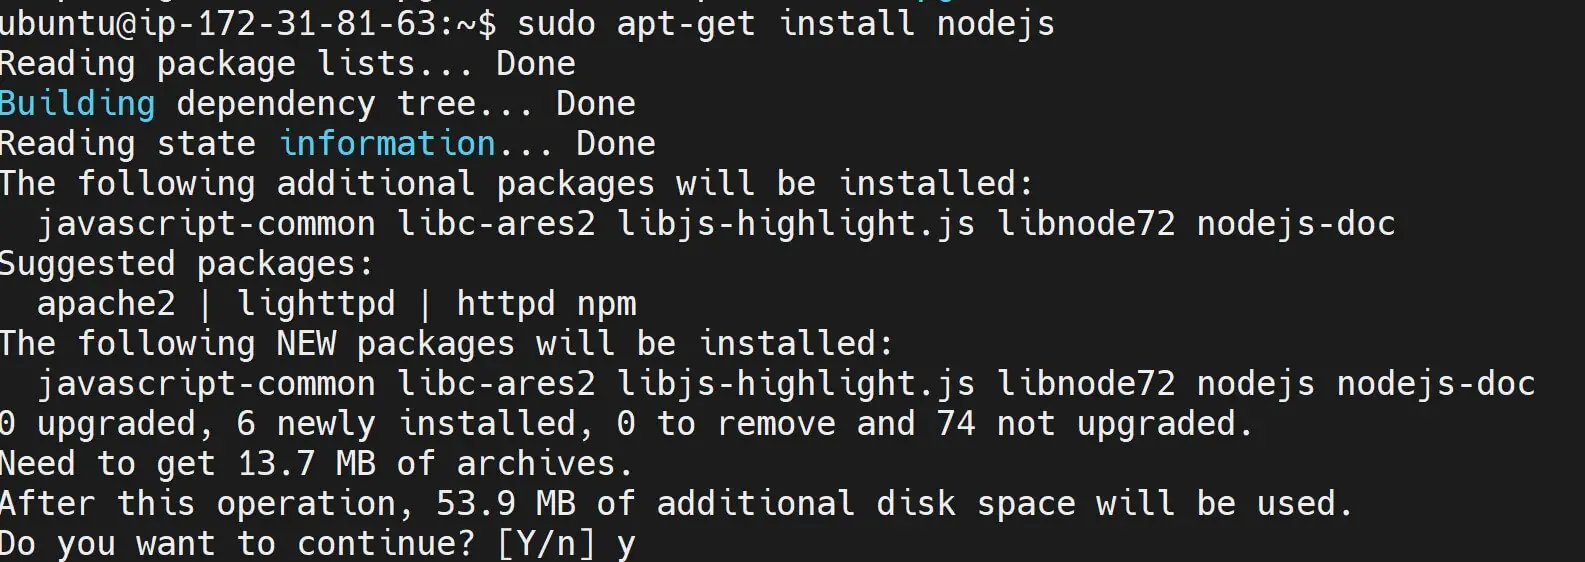 How to Install Node RED on Linux Ubuntu 20.04|22.04 LTS